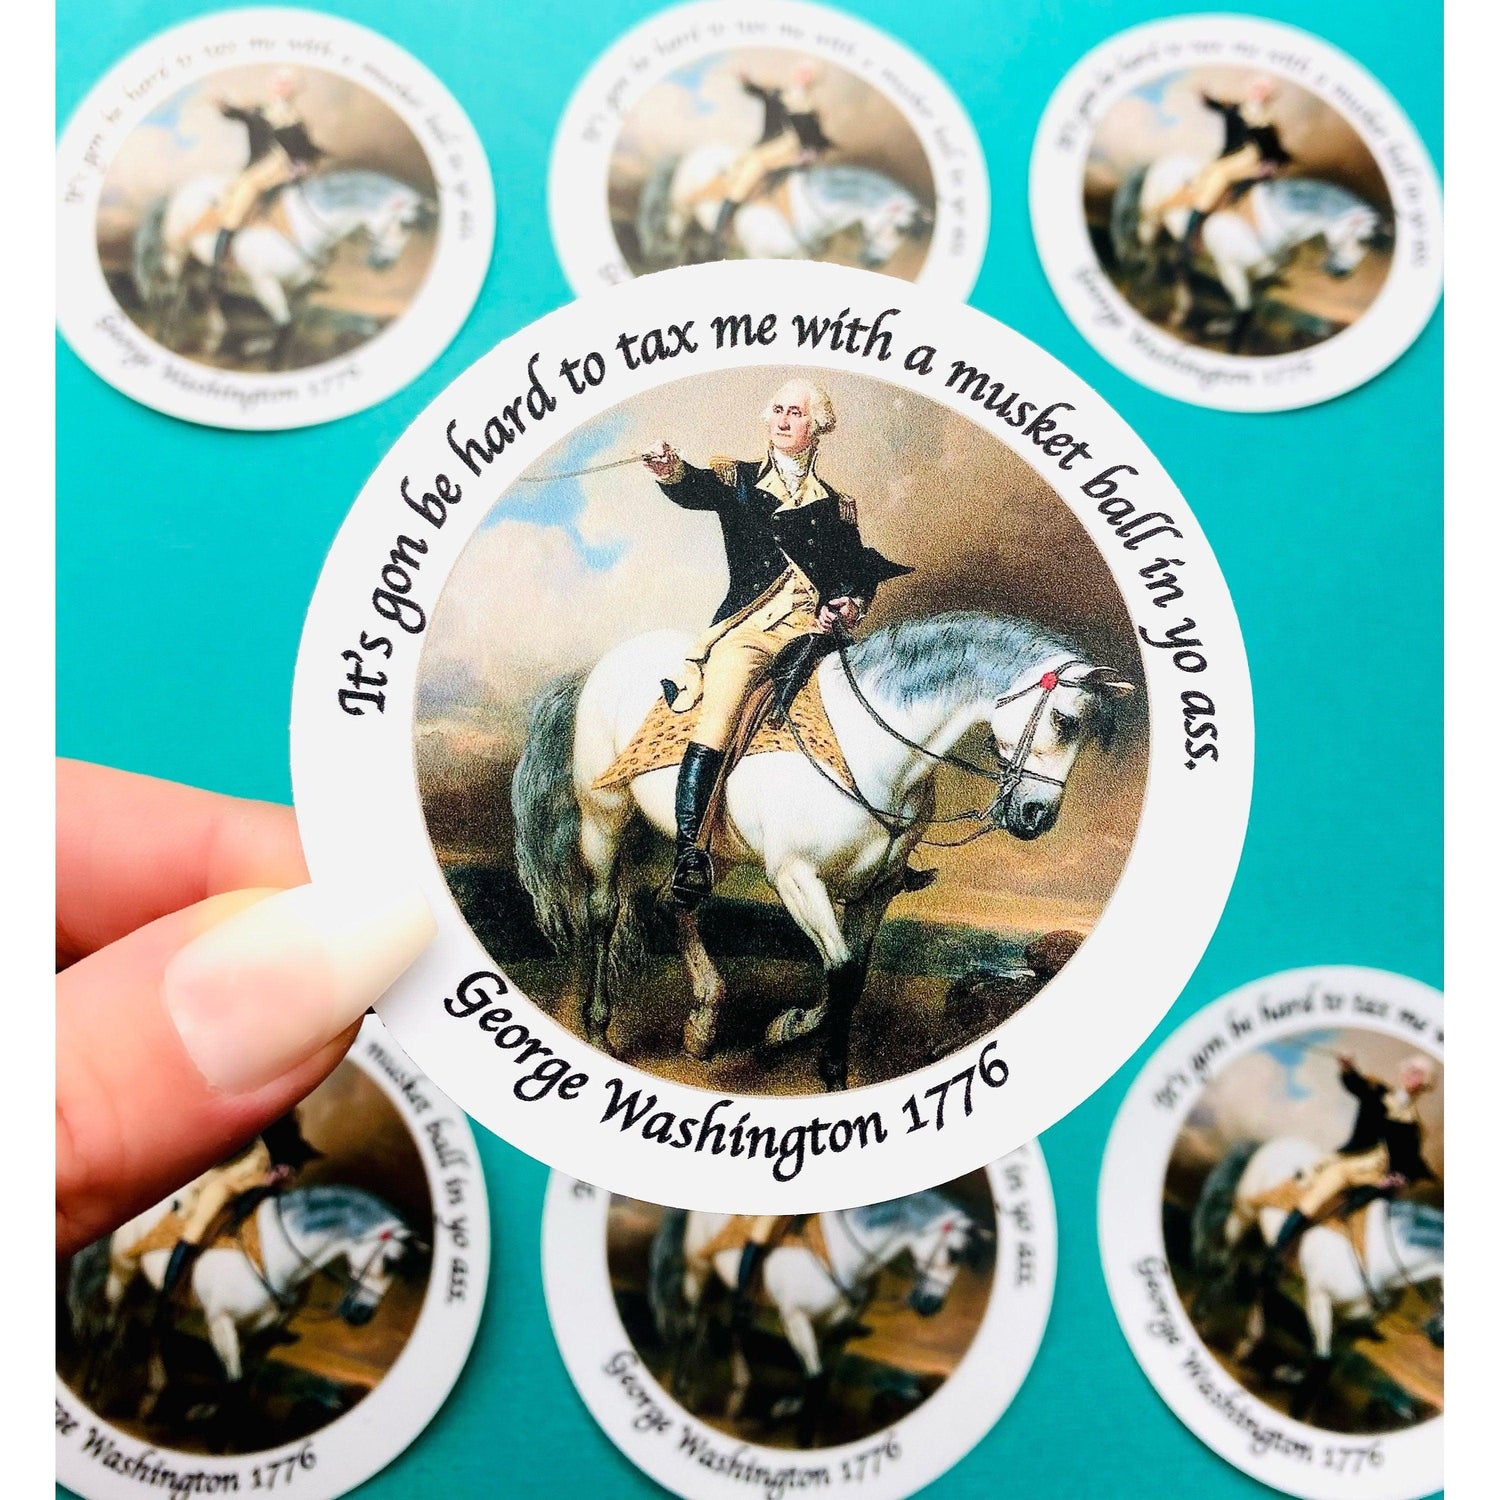 Funny George Washington Sticker 1776 Musket Ball In Yo Ass, No Taxing This Guy Sticker, Hilarious Sticker Independence Day American Merica - Ottos Grotto :: Stickers For Your Stuff